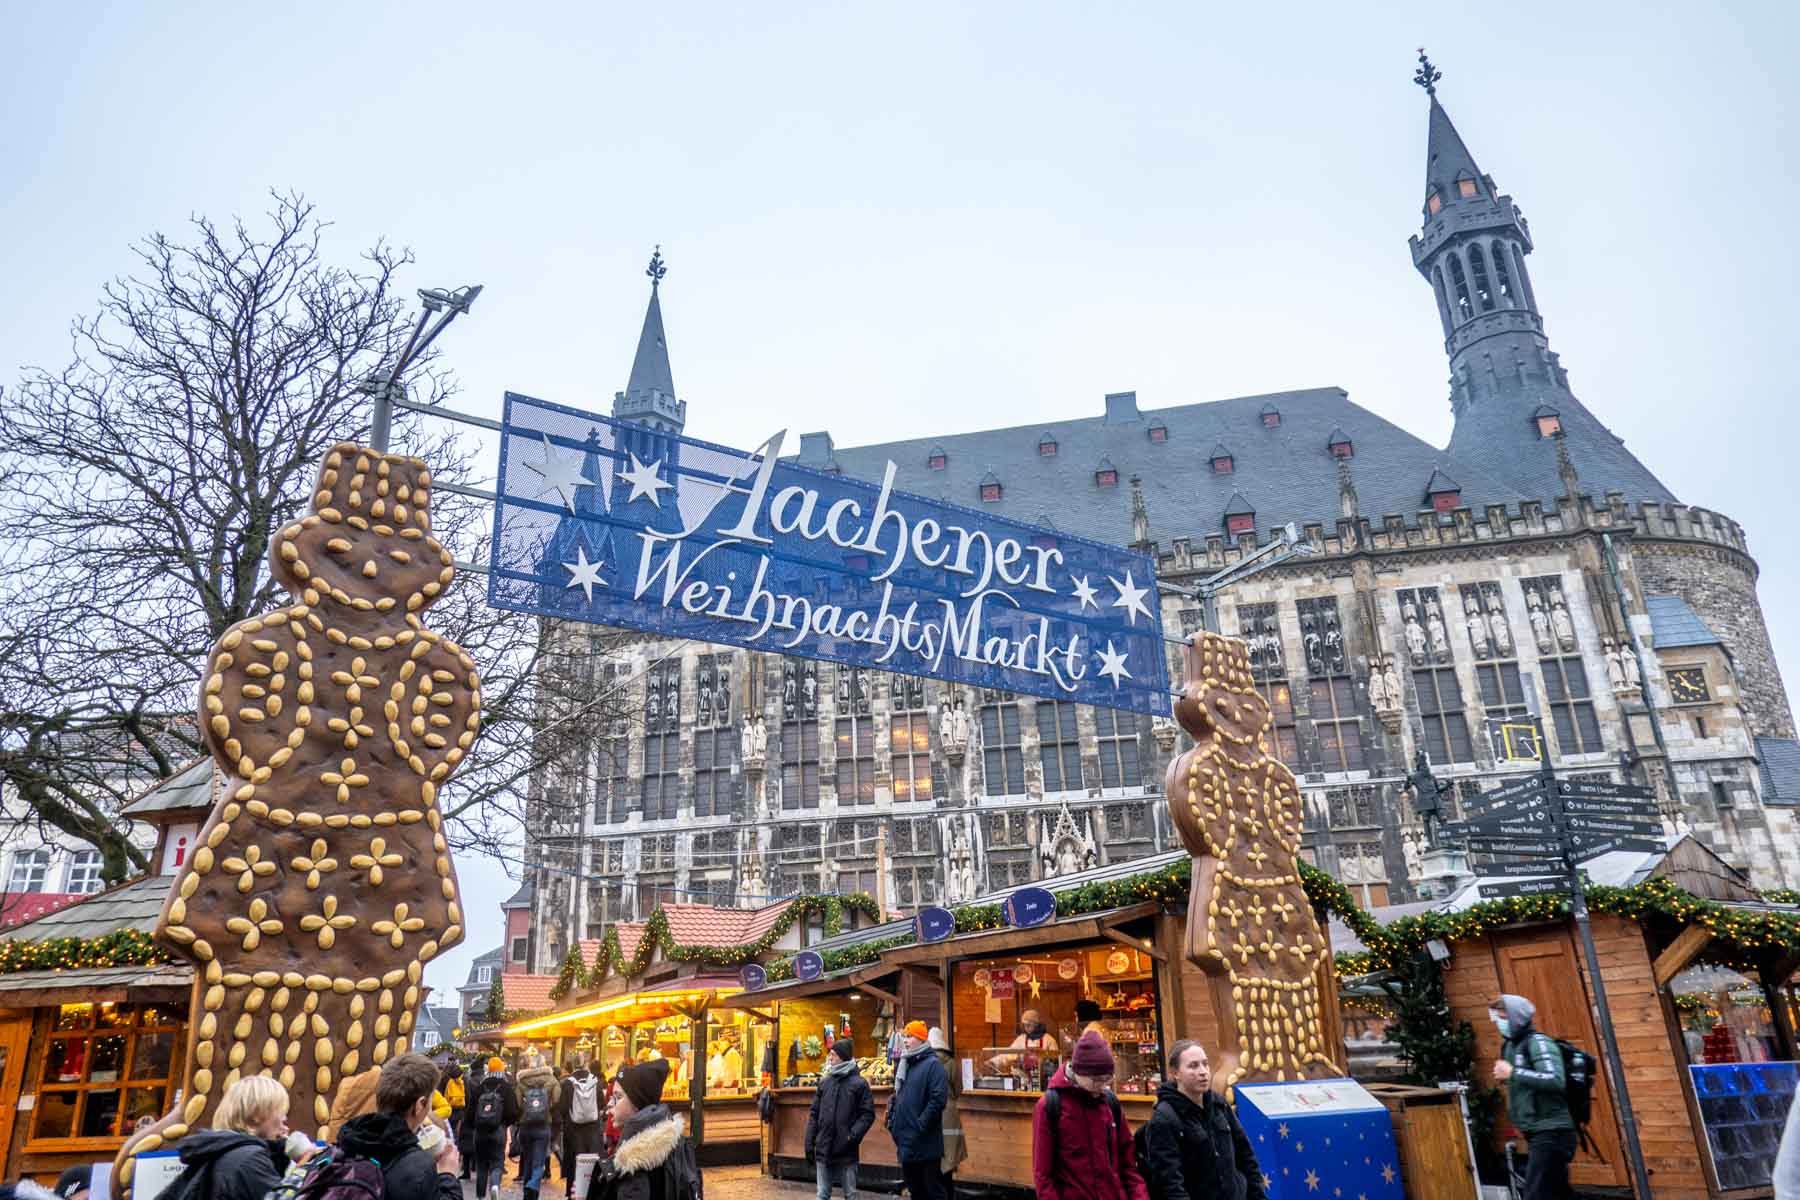 Gingerbread men beside a sign for the Aachen Christmas market and rows of vendor stalls